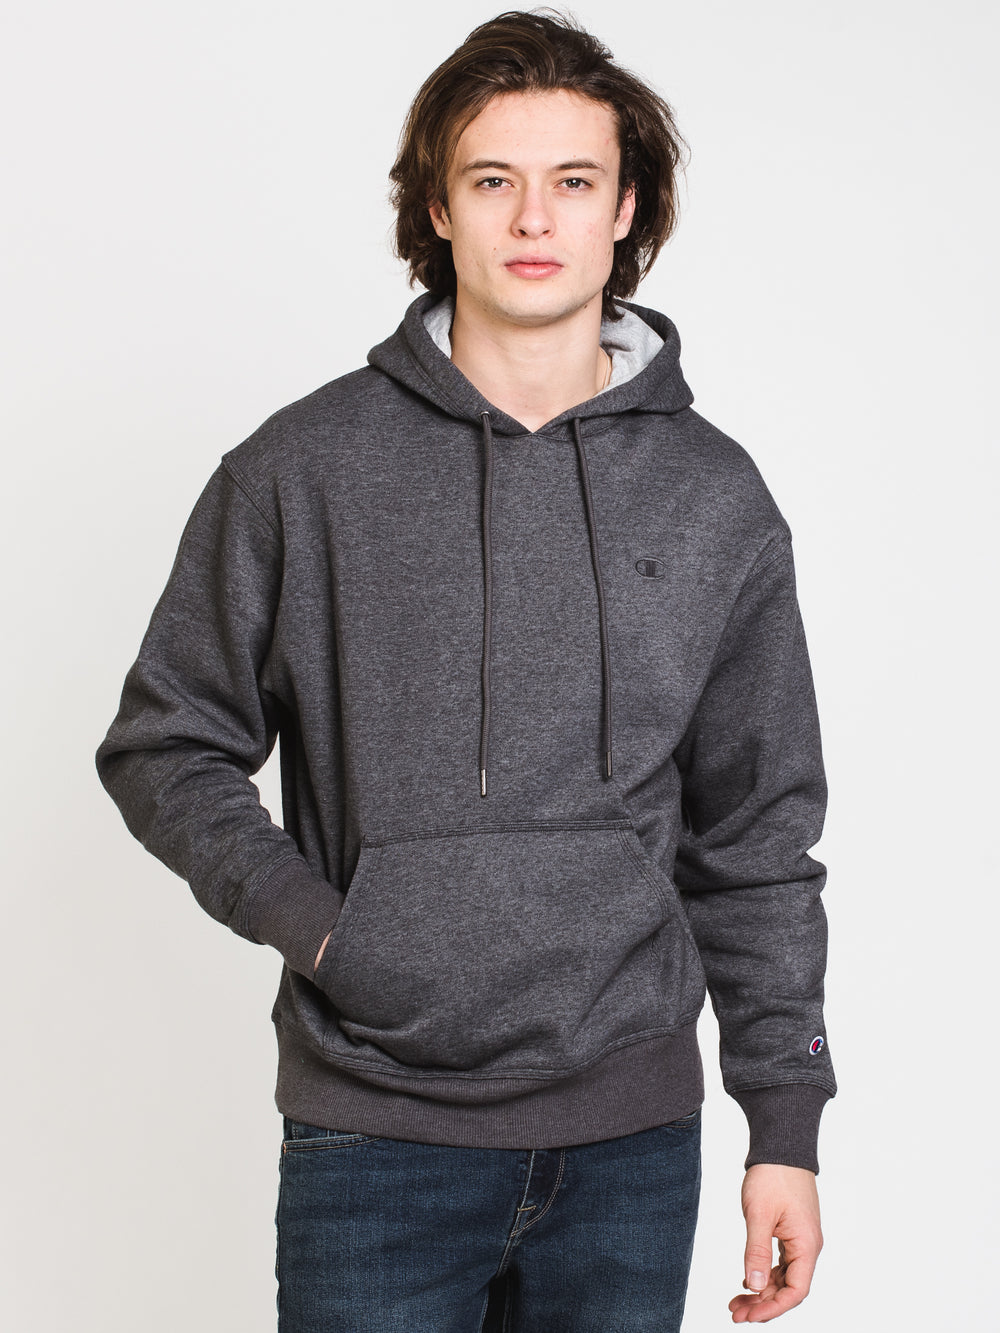 CHAMPION POWERBLEND FLEECE EMBROIDERED C HOODIE  - CLEARANCE